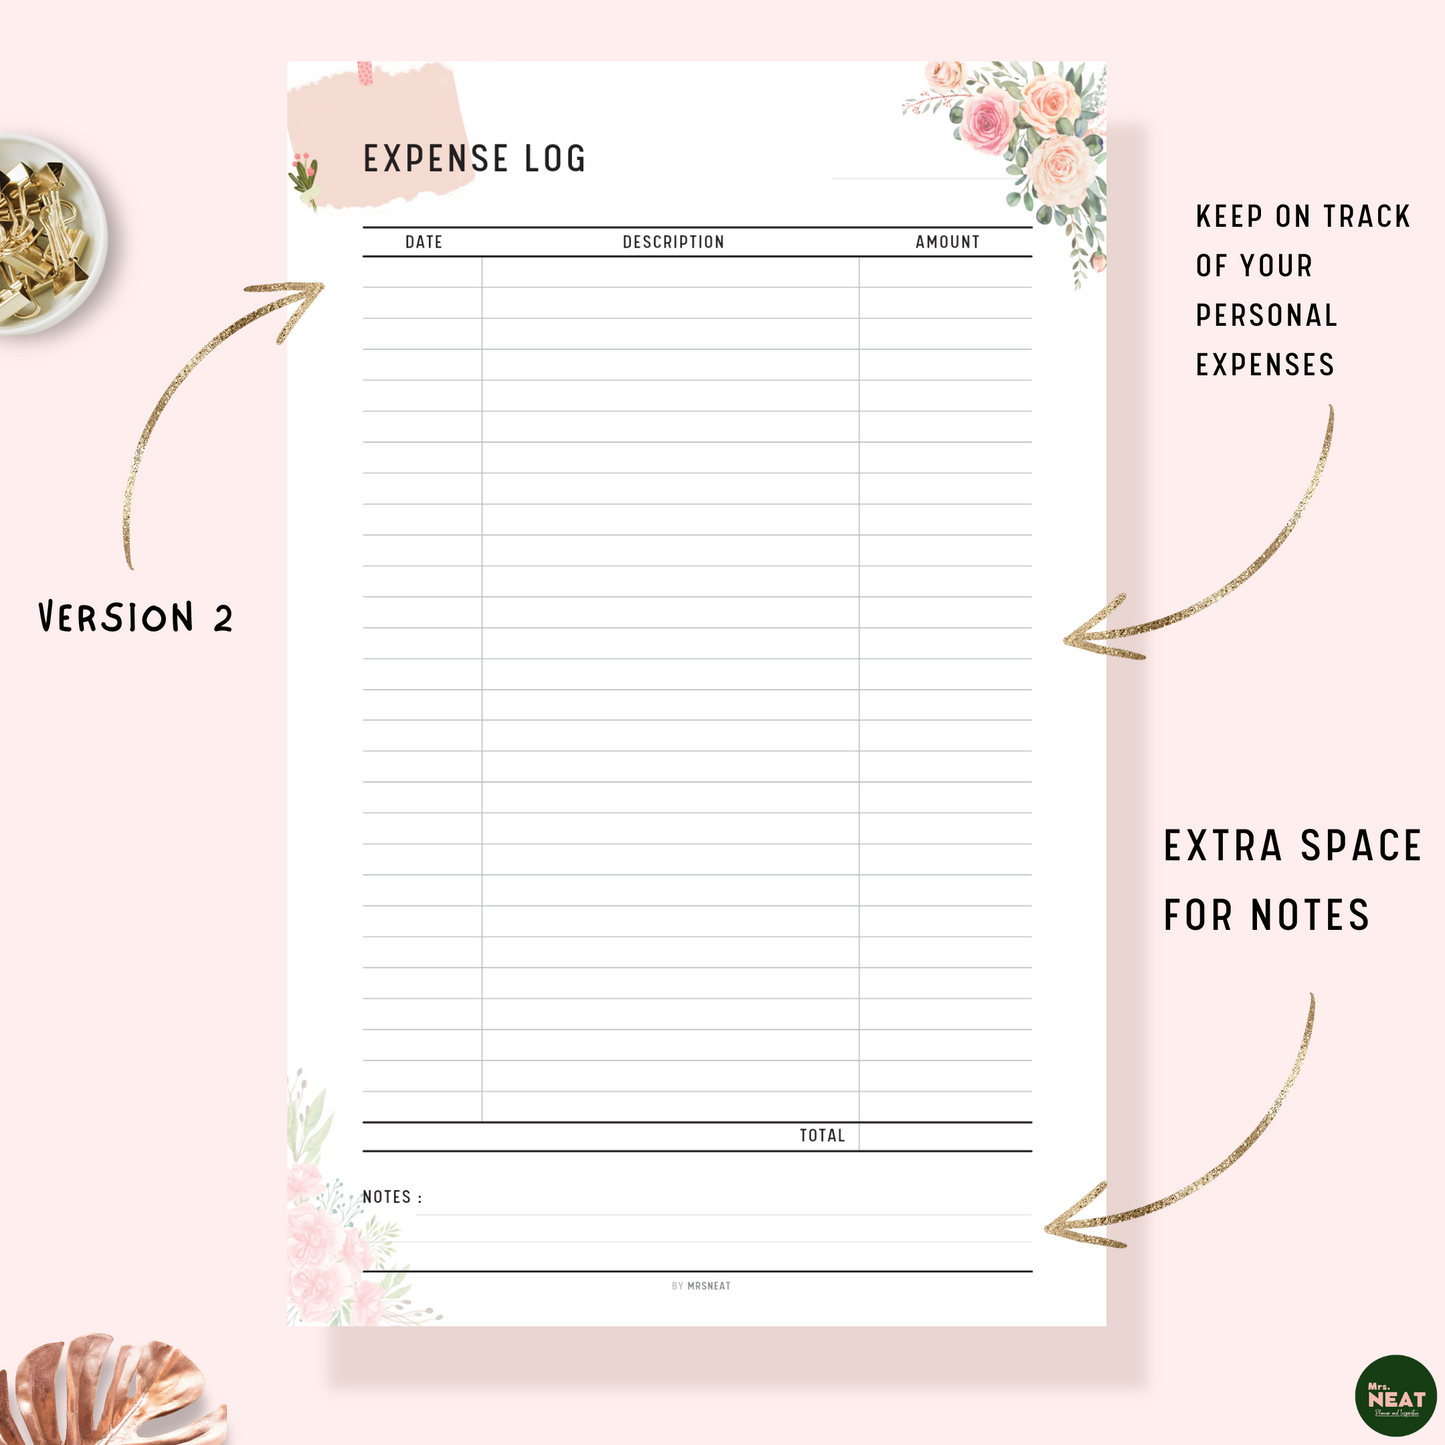 Floral Expense Log Tracker Printable Planner with room for date, description, amount and notes